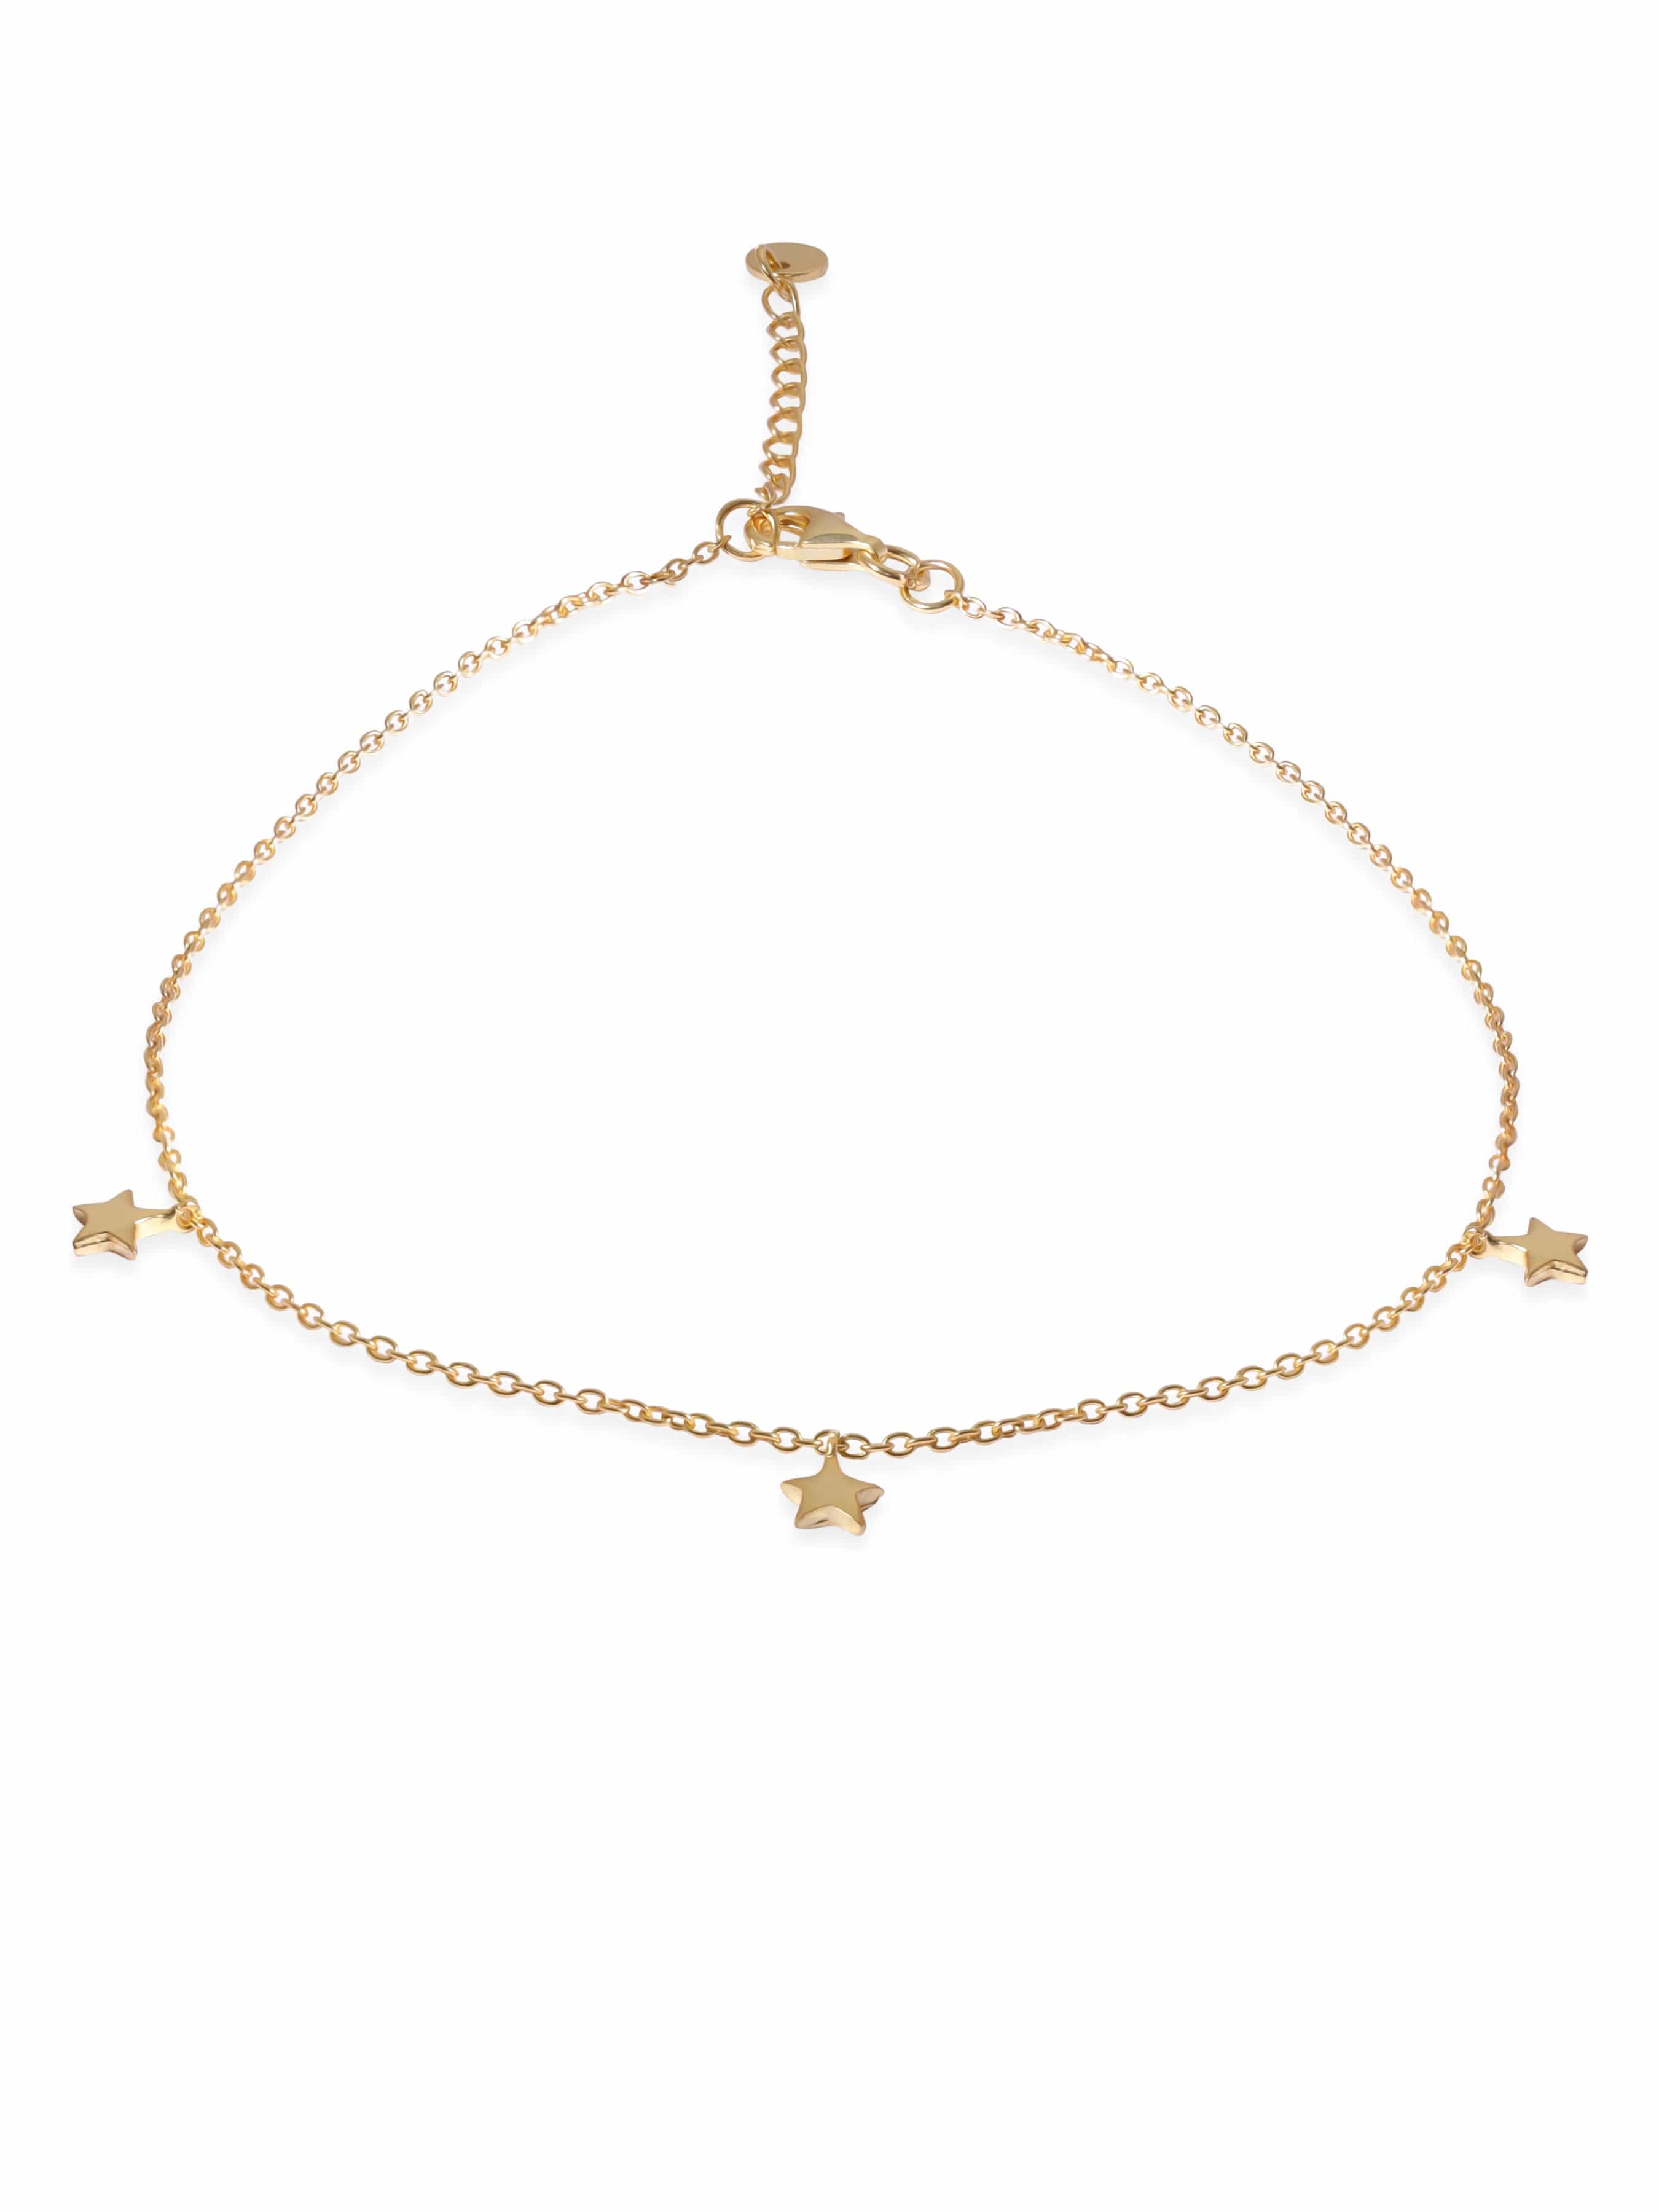 Crystal in Heart Charm Bangle Bracelet | ALEX AND ANI